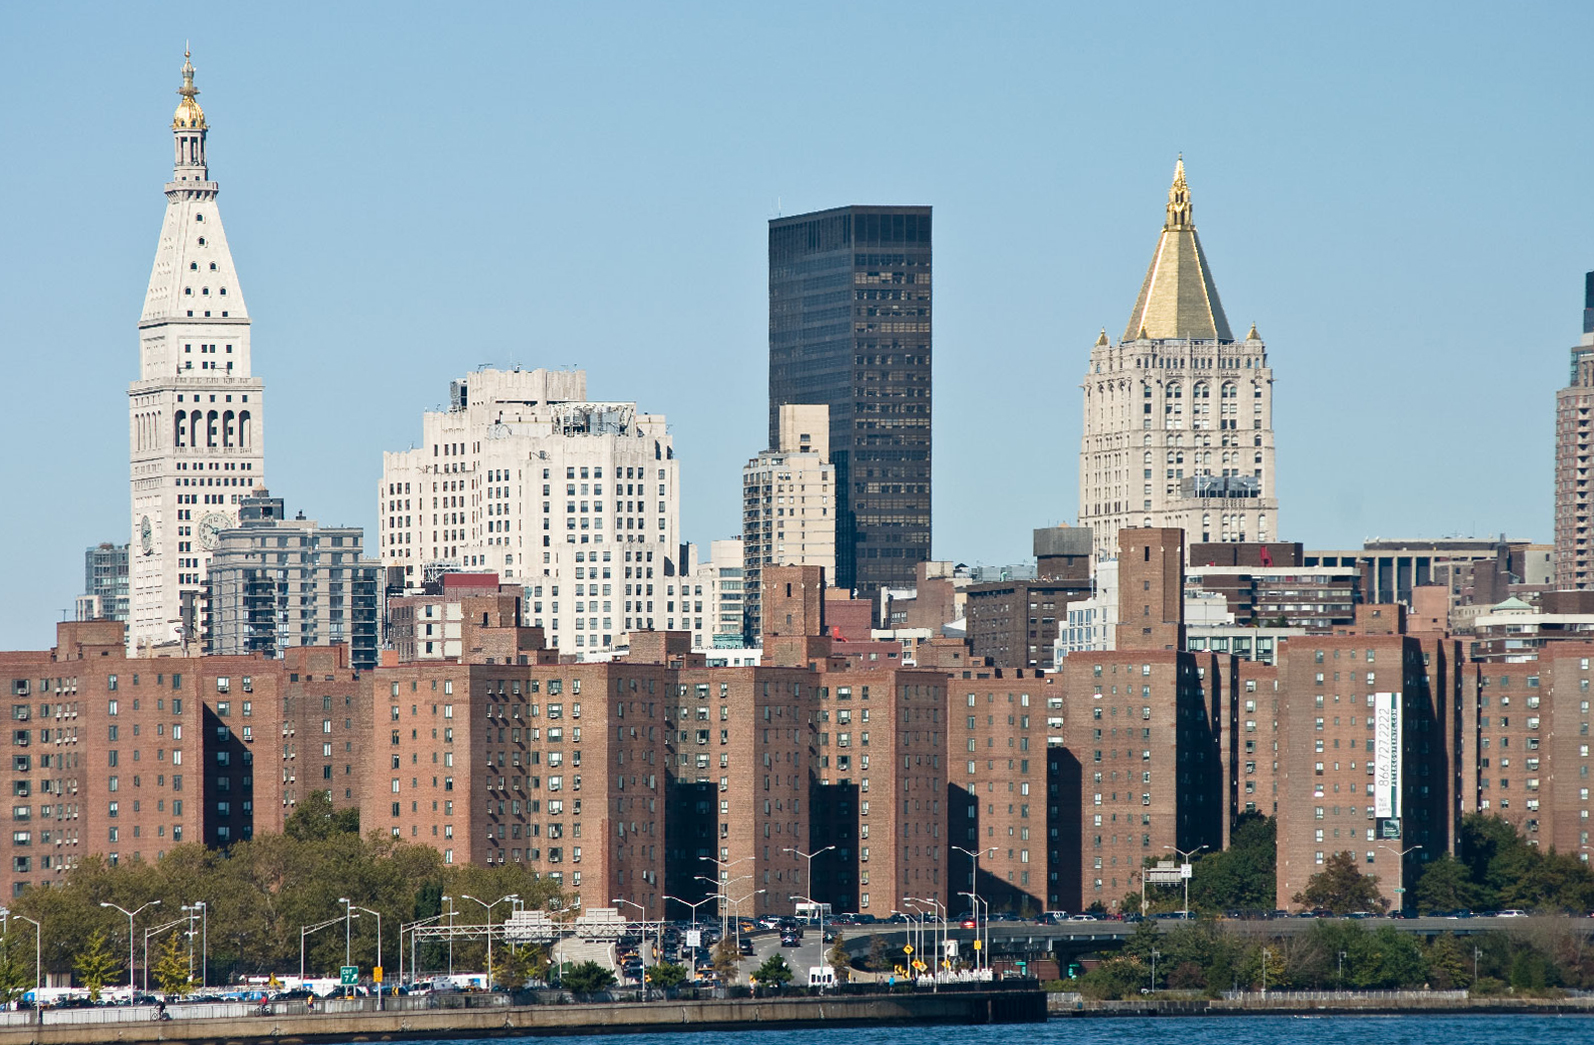 New York buildings claim the country’s highest property taxes